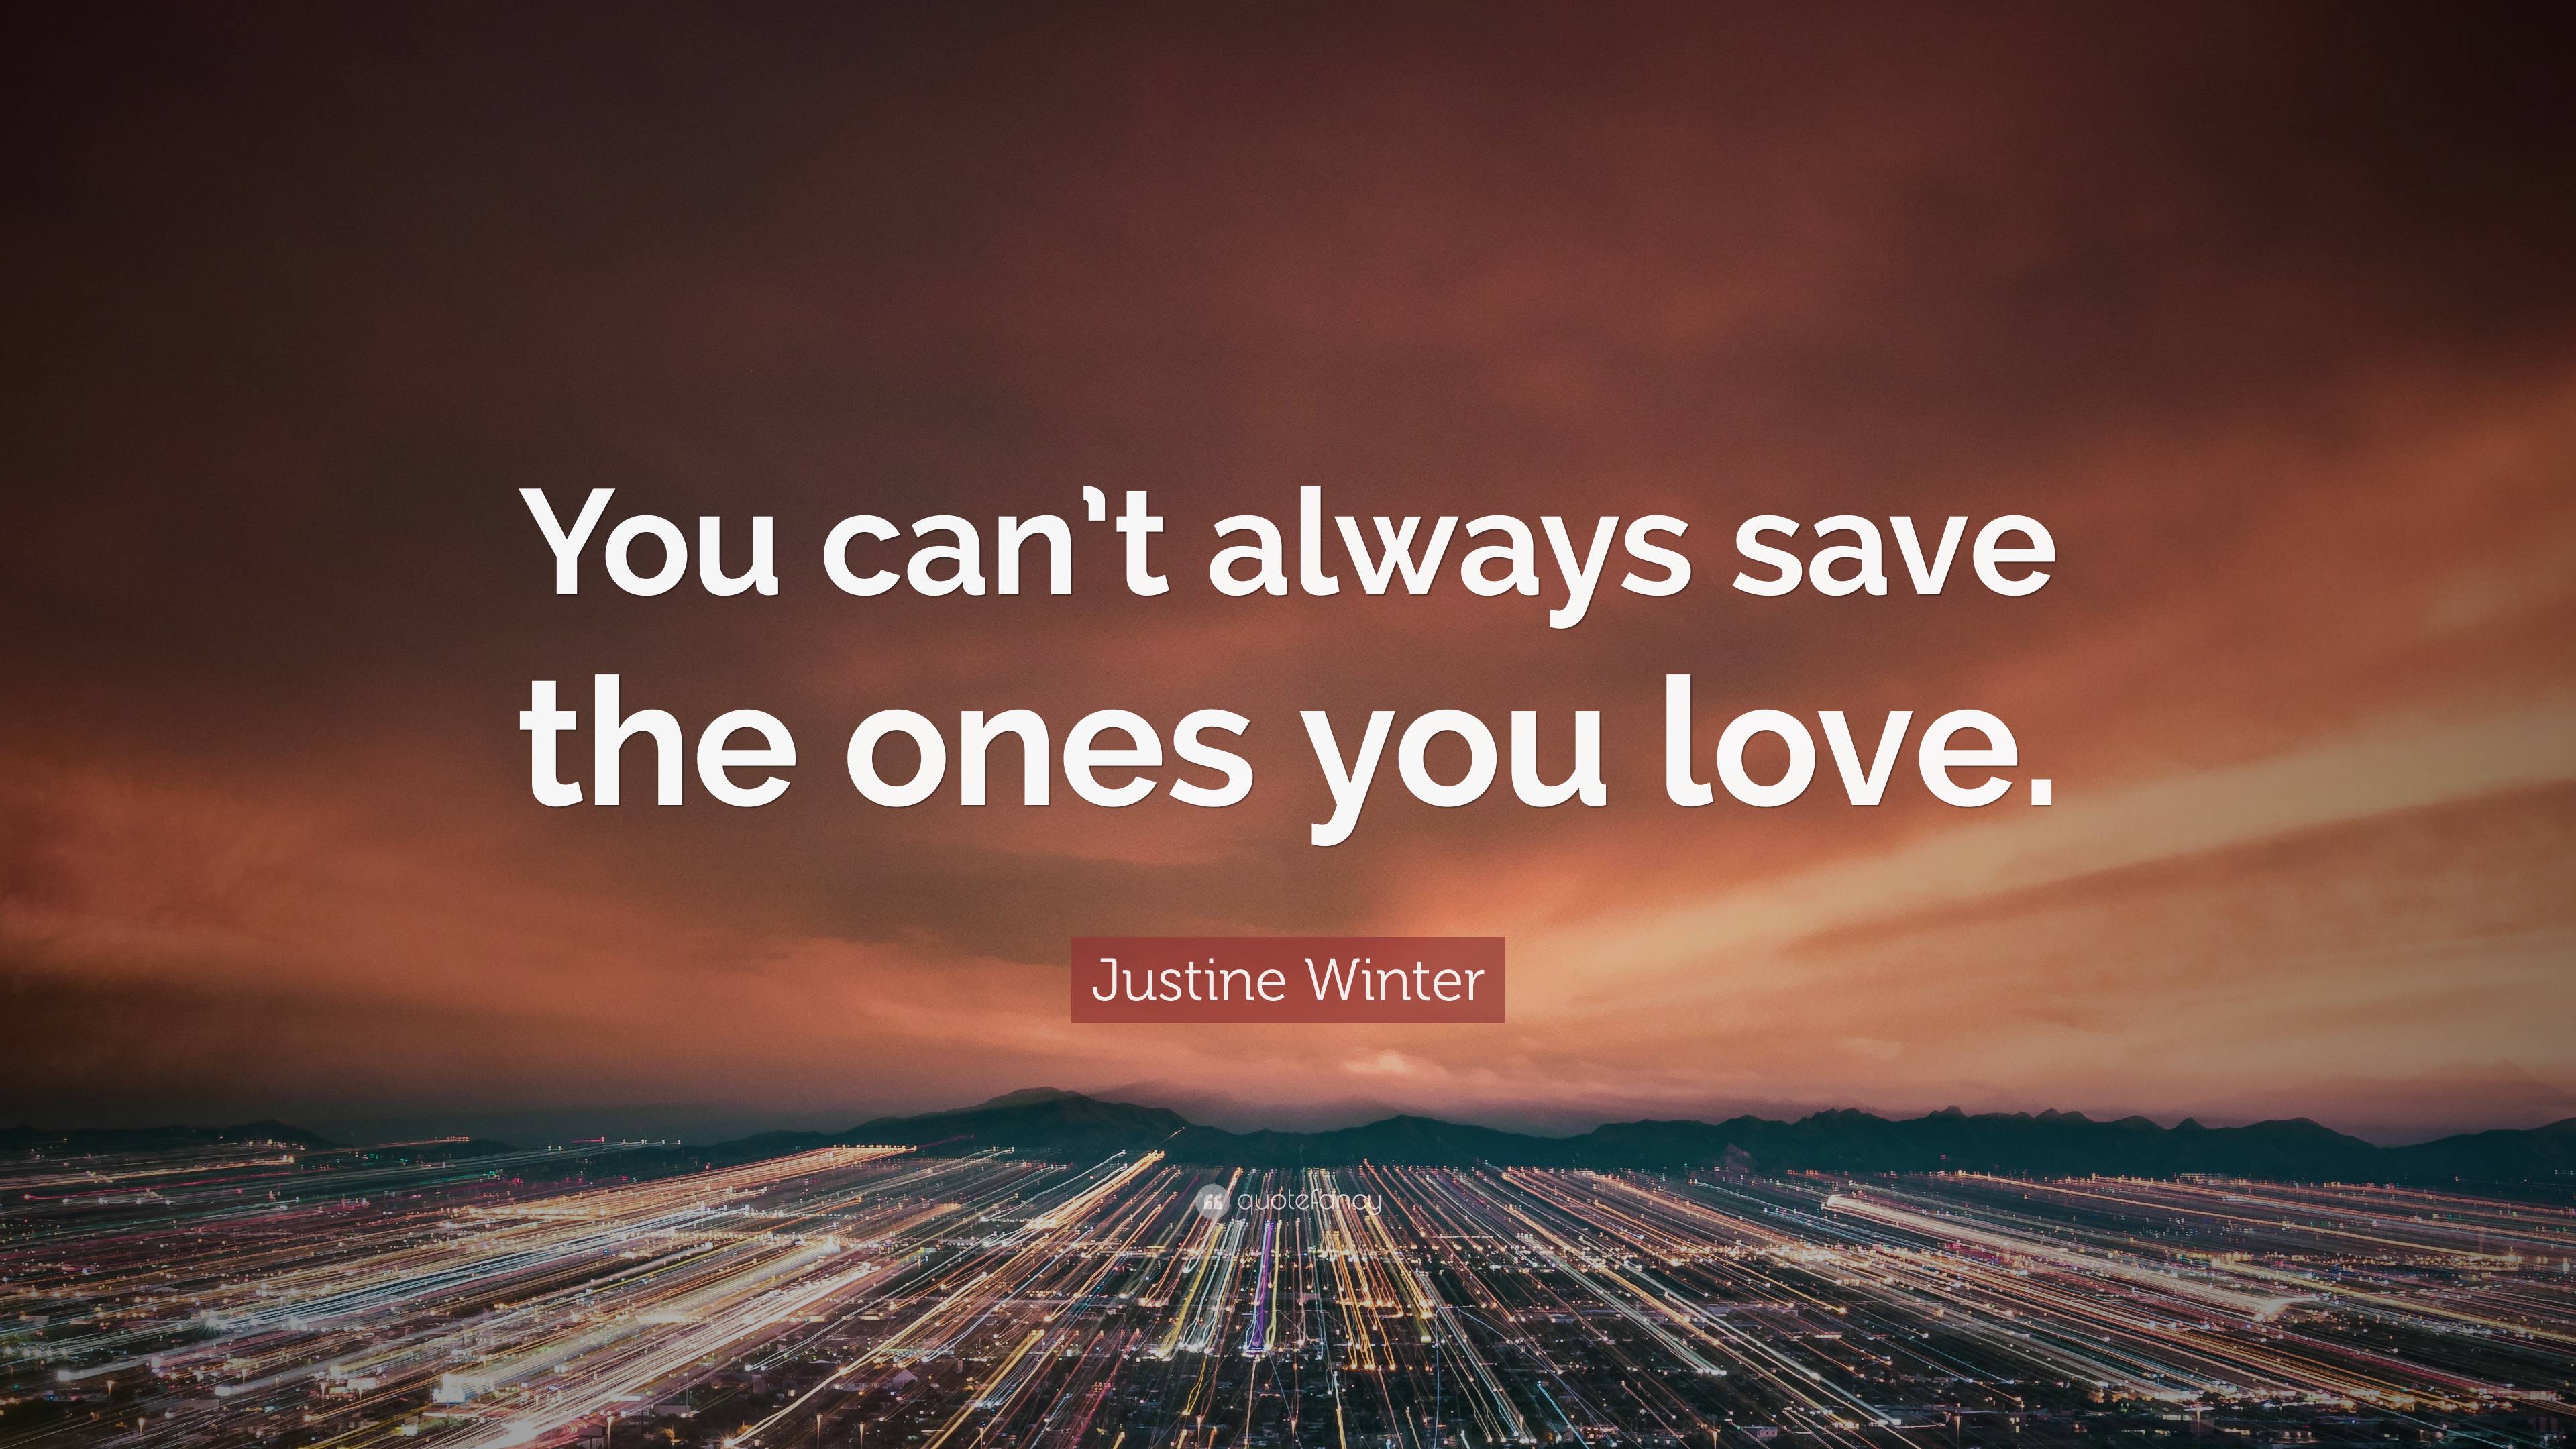 Justine Winter Quote “You can’t always save the ones you love.”